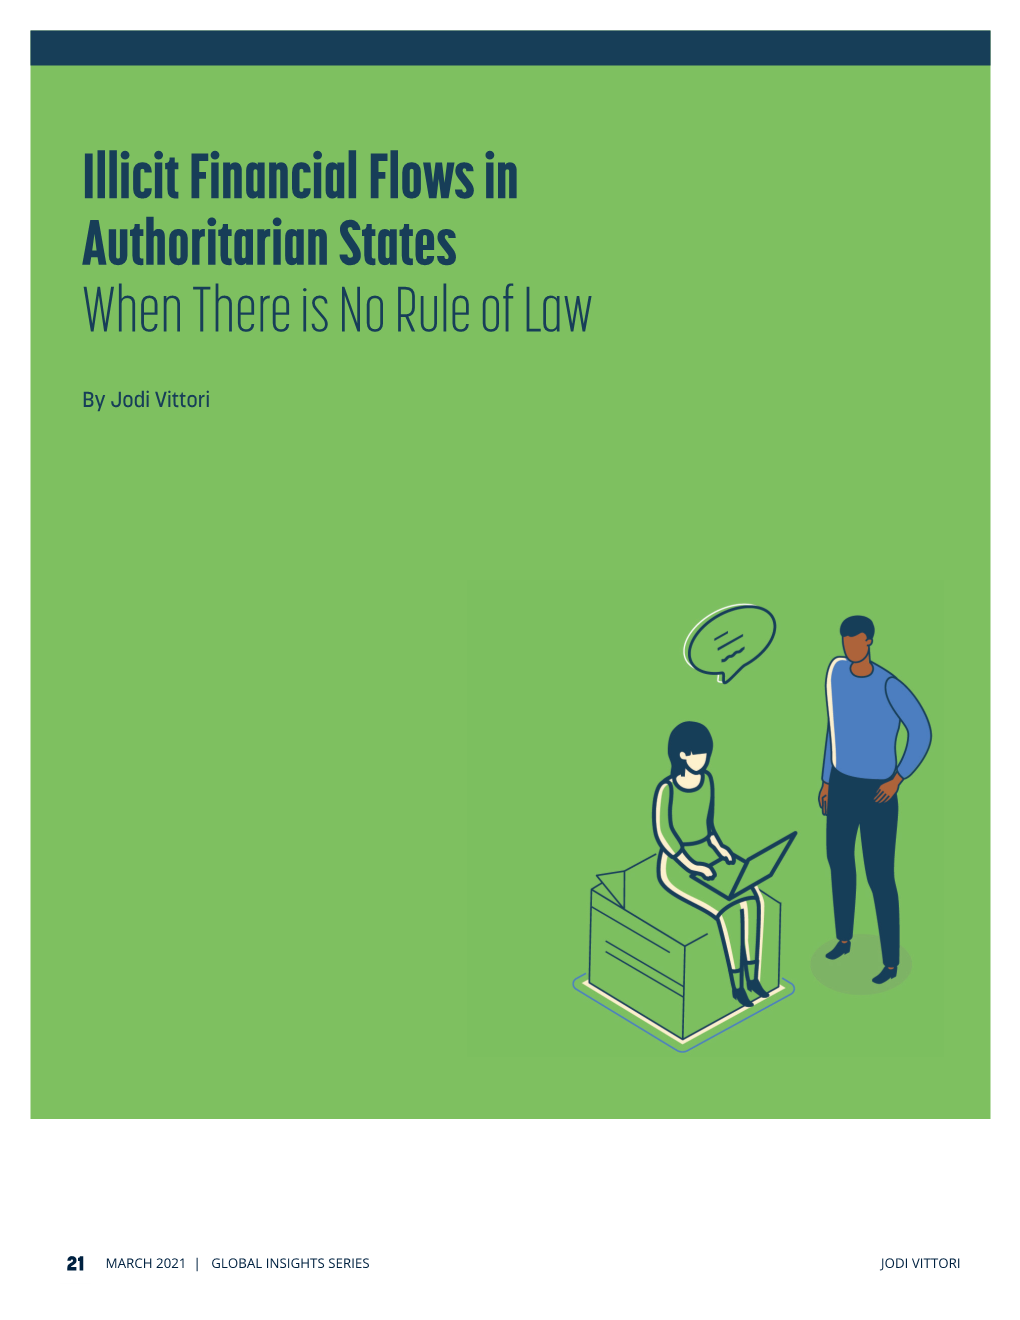 Illicit Financial Flows in Authoritarian States When There Is No Rule of Law